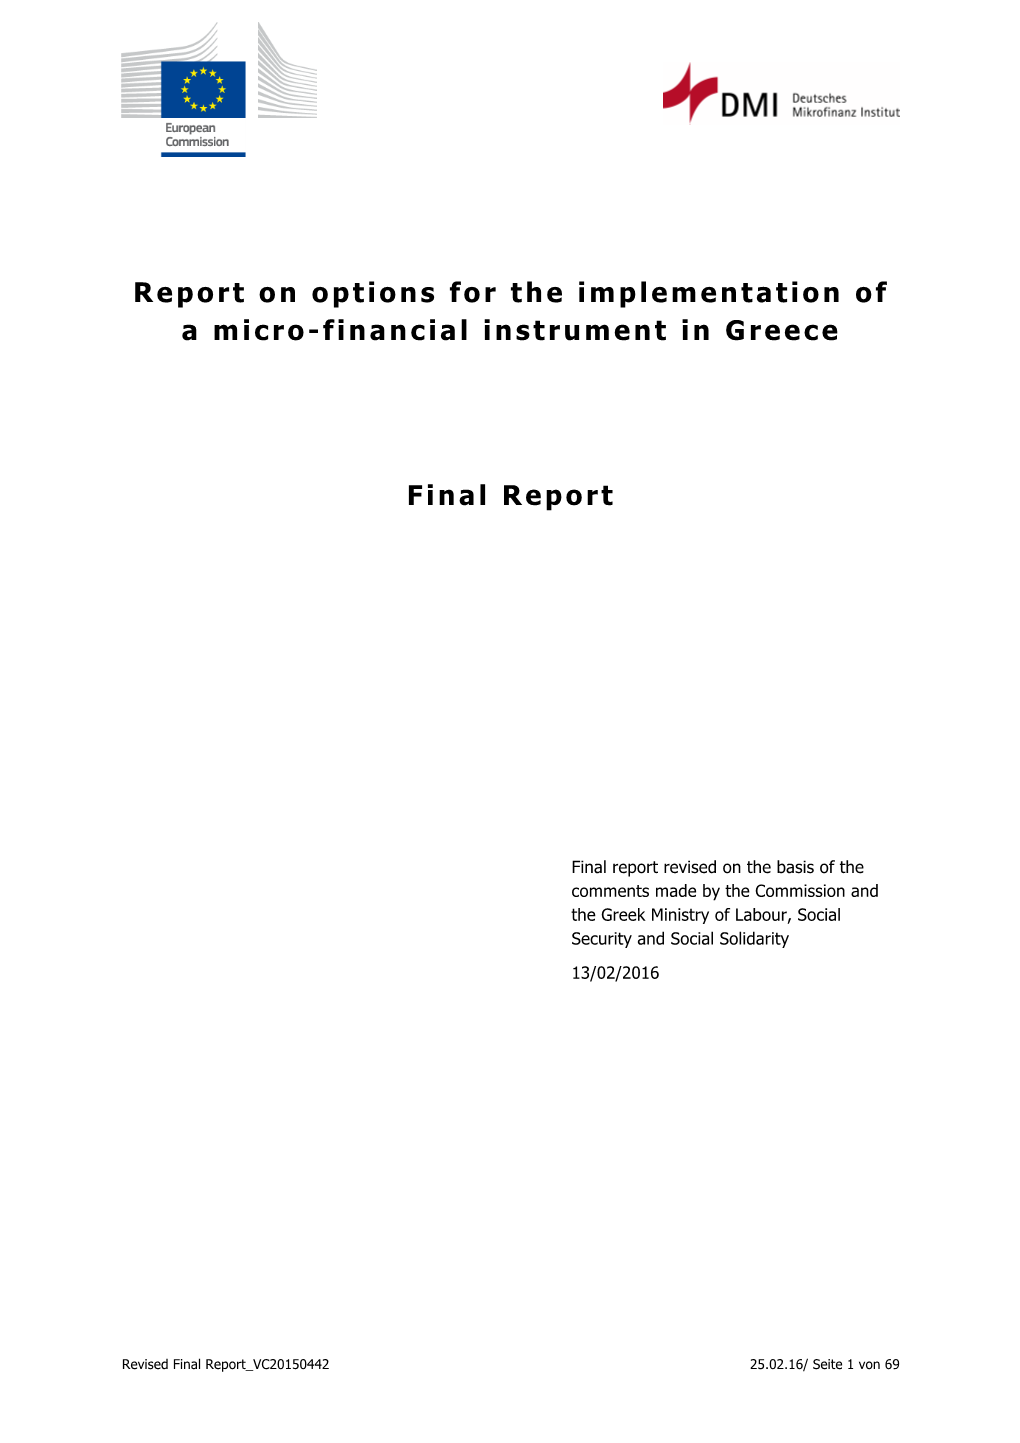 Report on Options for the Implementation of a Micro-Financial